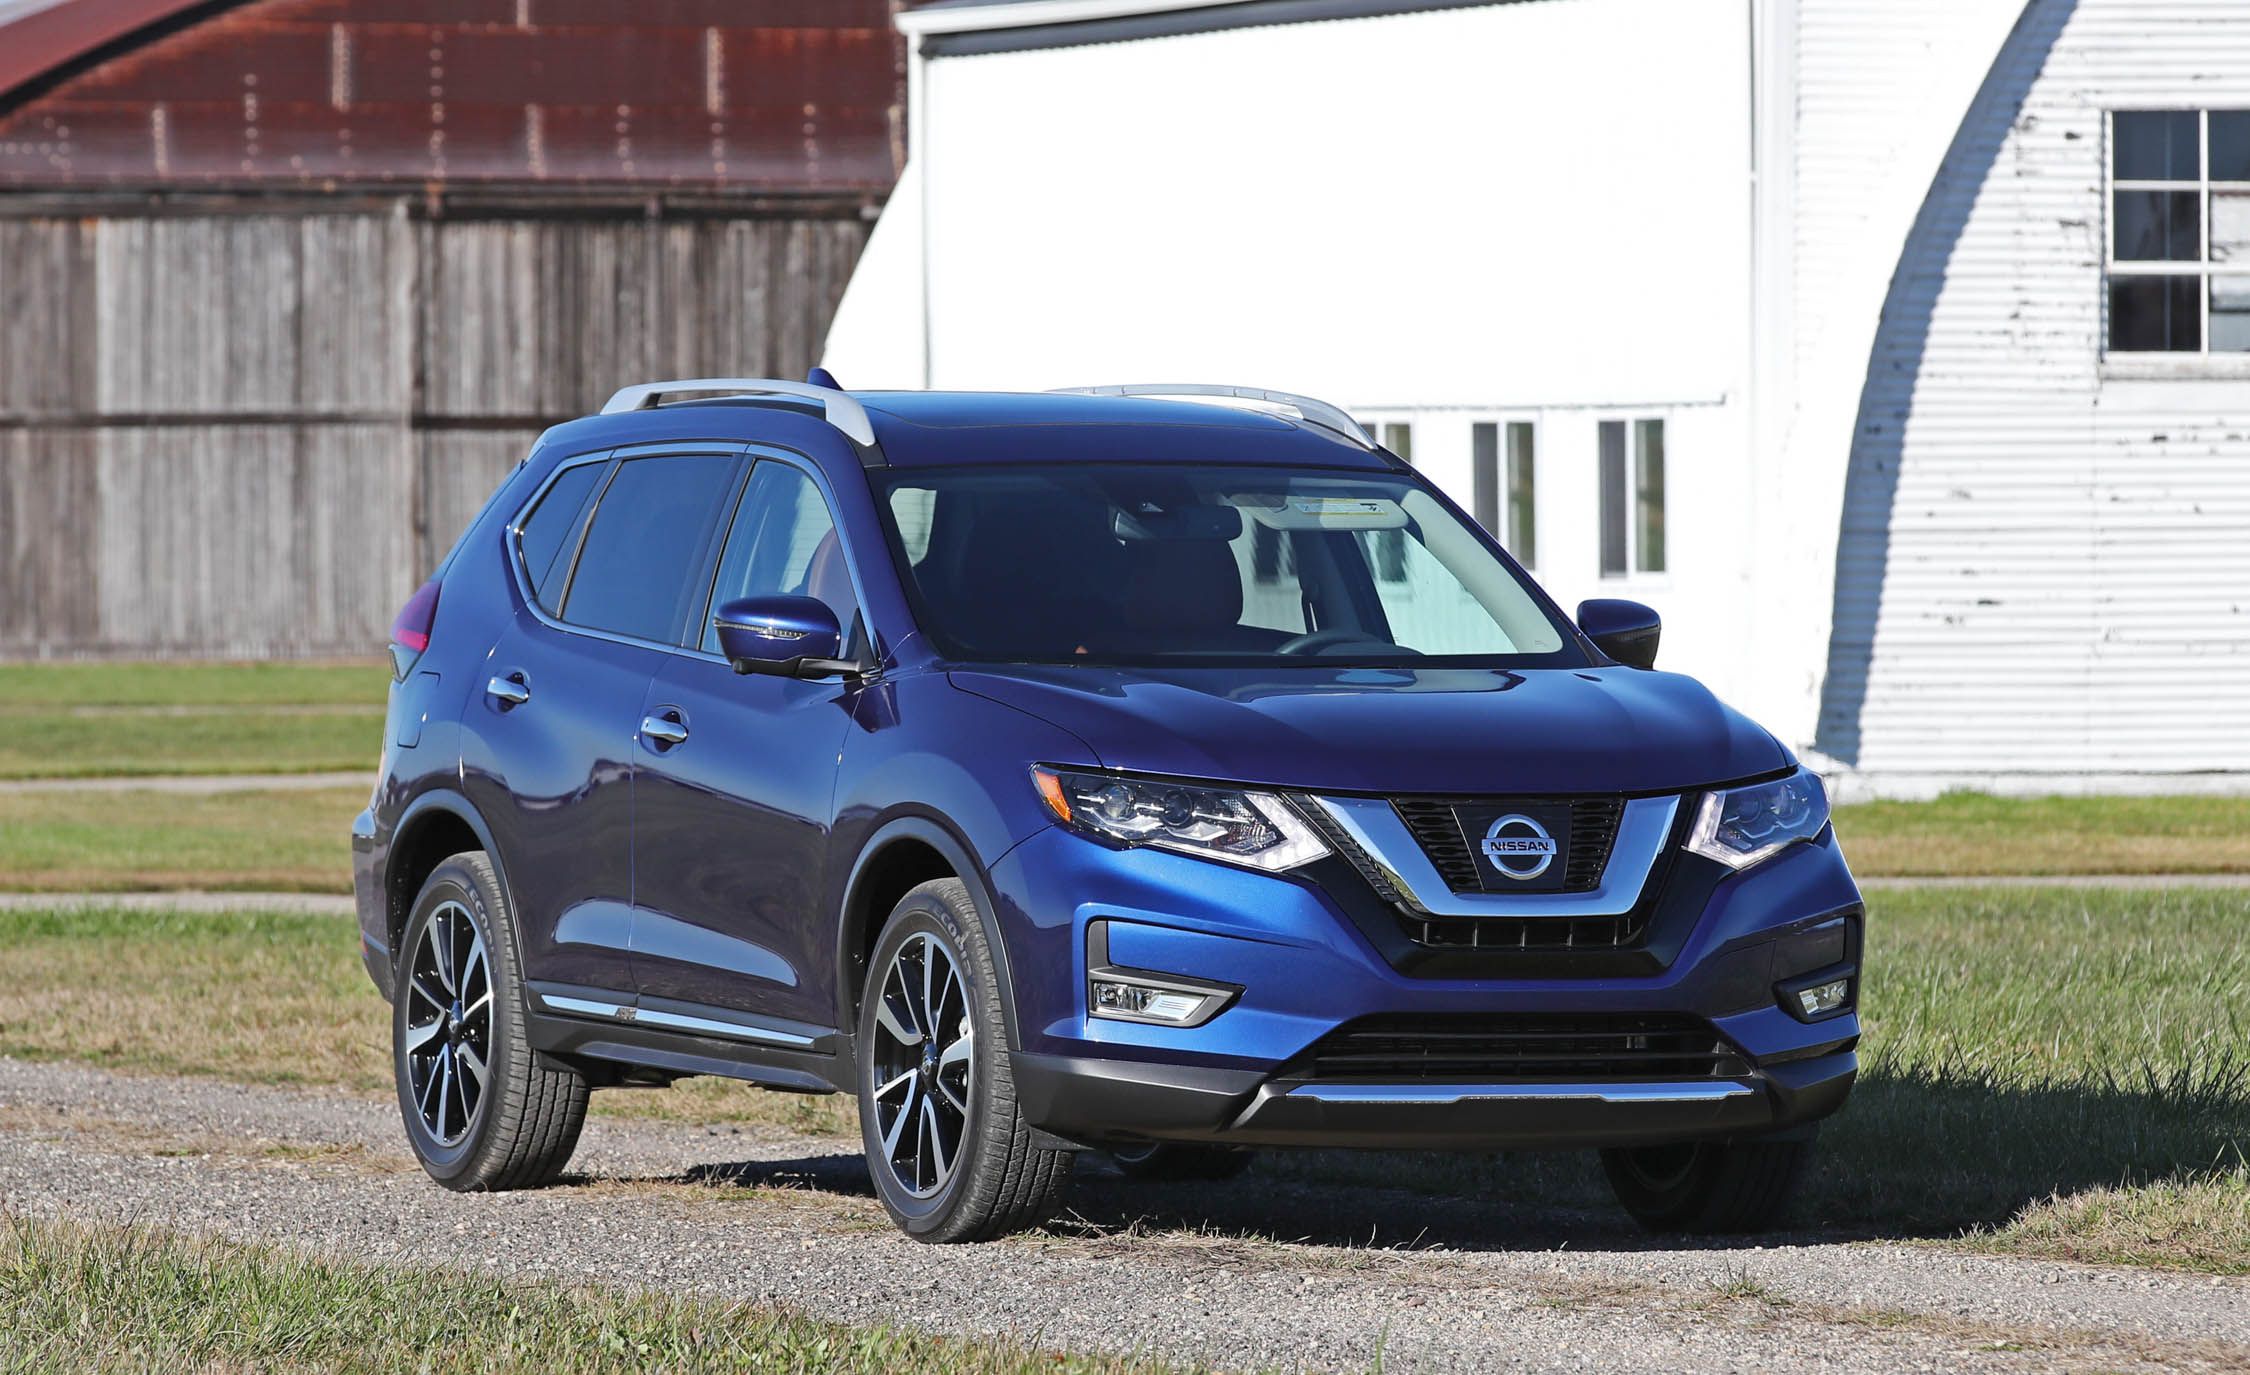 2017 Nissan Rogue Exterior (View 31 of 37)